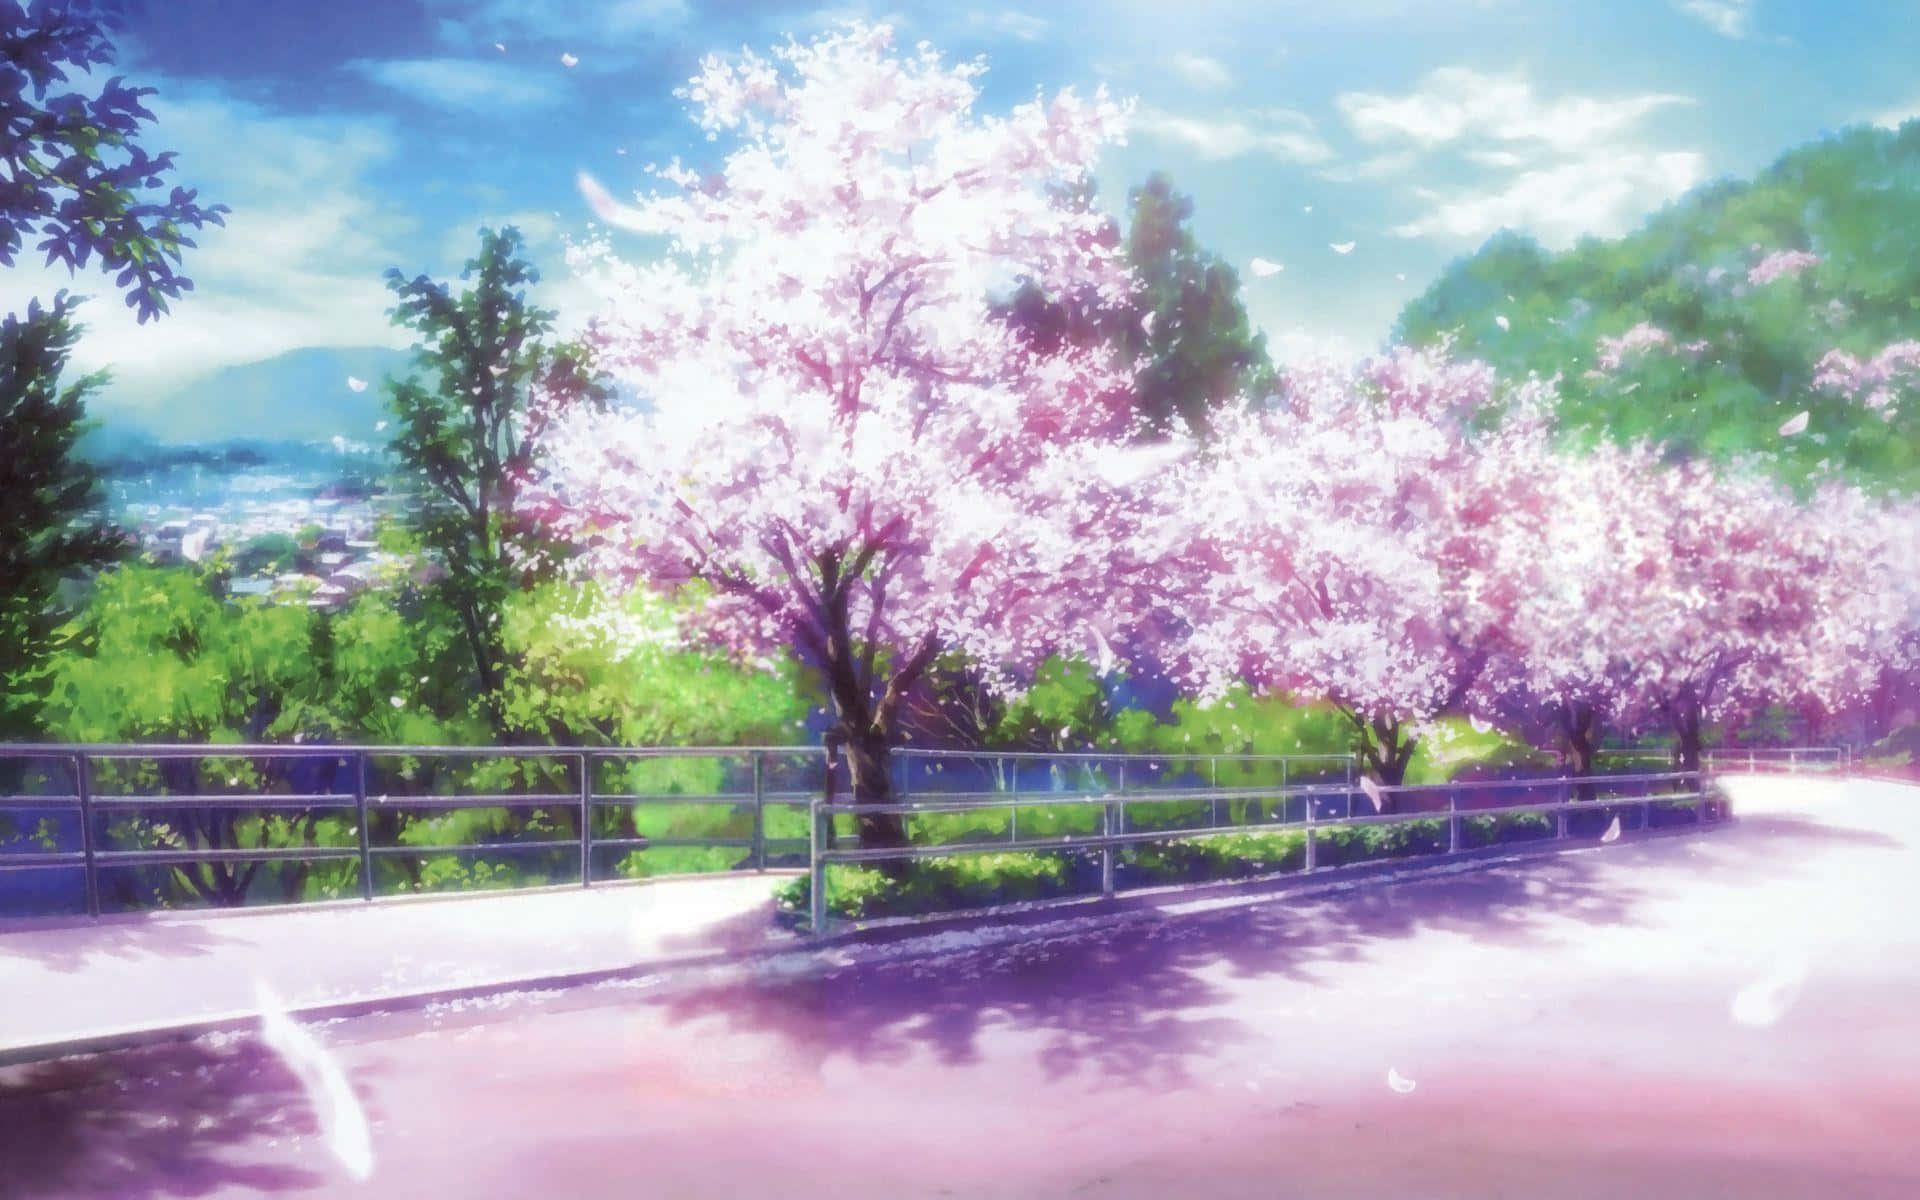 Take a peaceful stroll while taking in the beauty of cherry blossom trees in a unique anime setting. Wallpaper